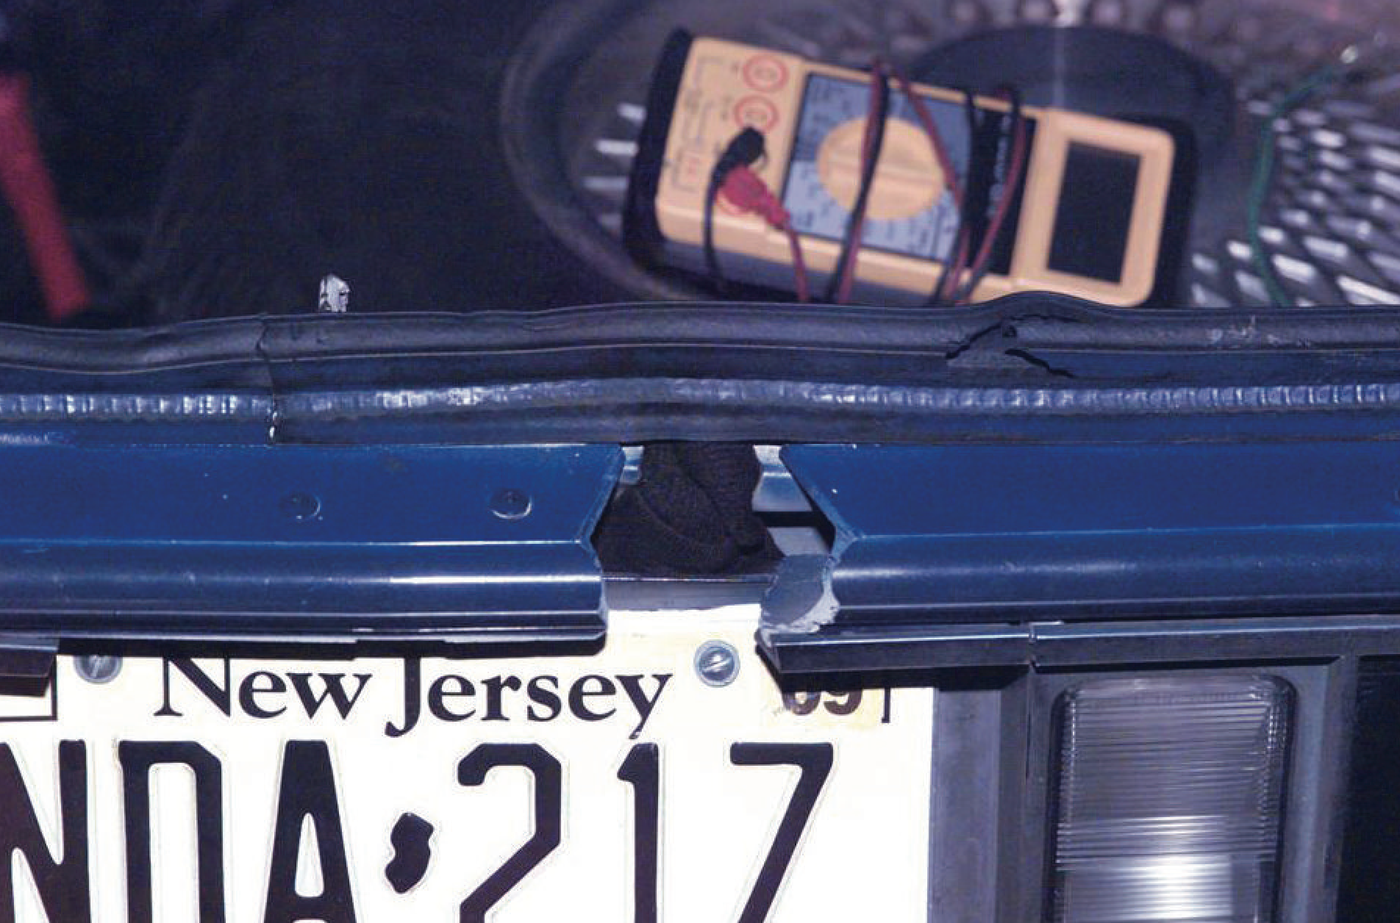 Evidence from the D.C. Beltway sniper case, where John Allen Muhammed and Lee Boyd Malvo used a hole in the trunk of their Chevy Caprice to shoot victims in October 2002.